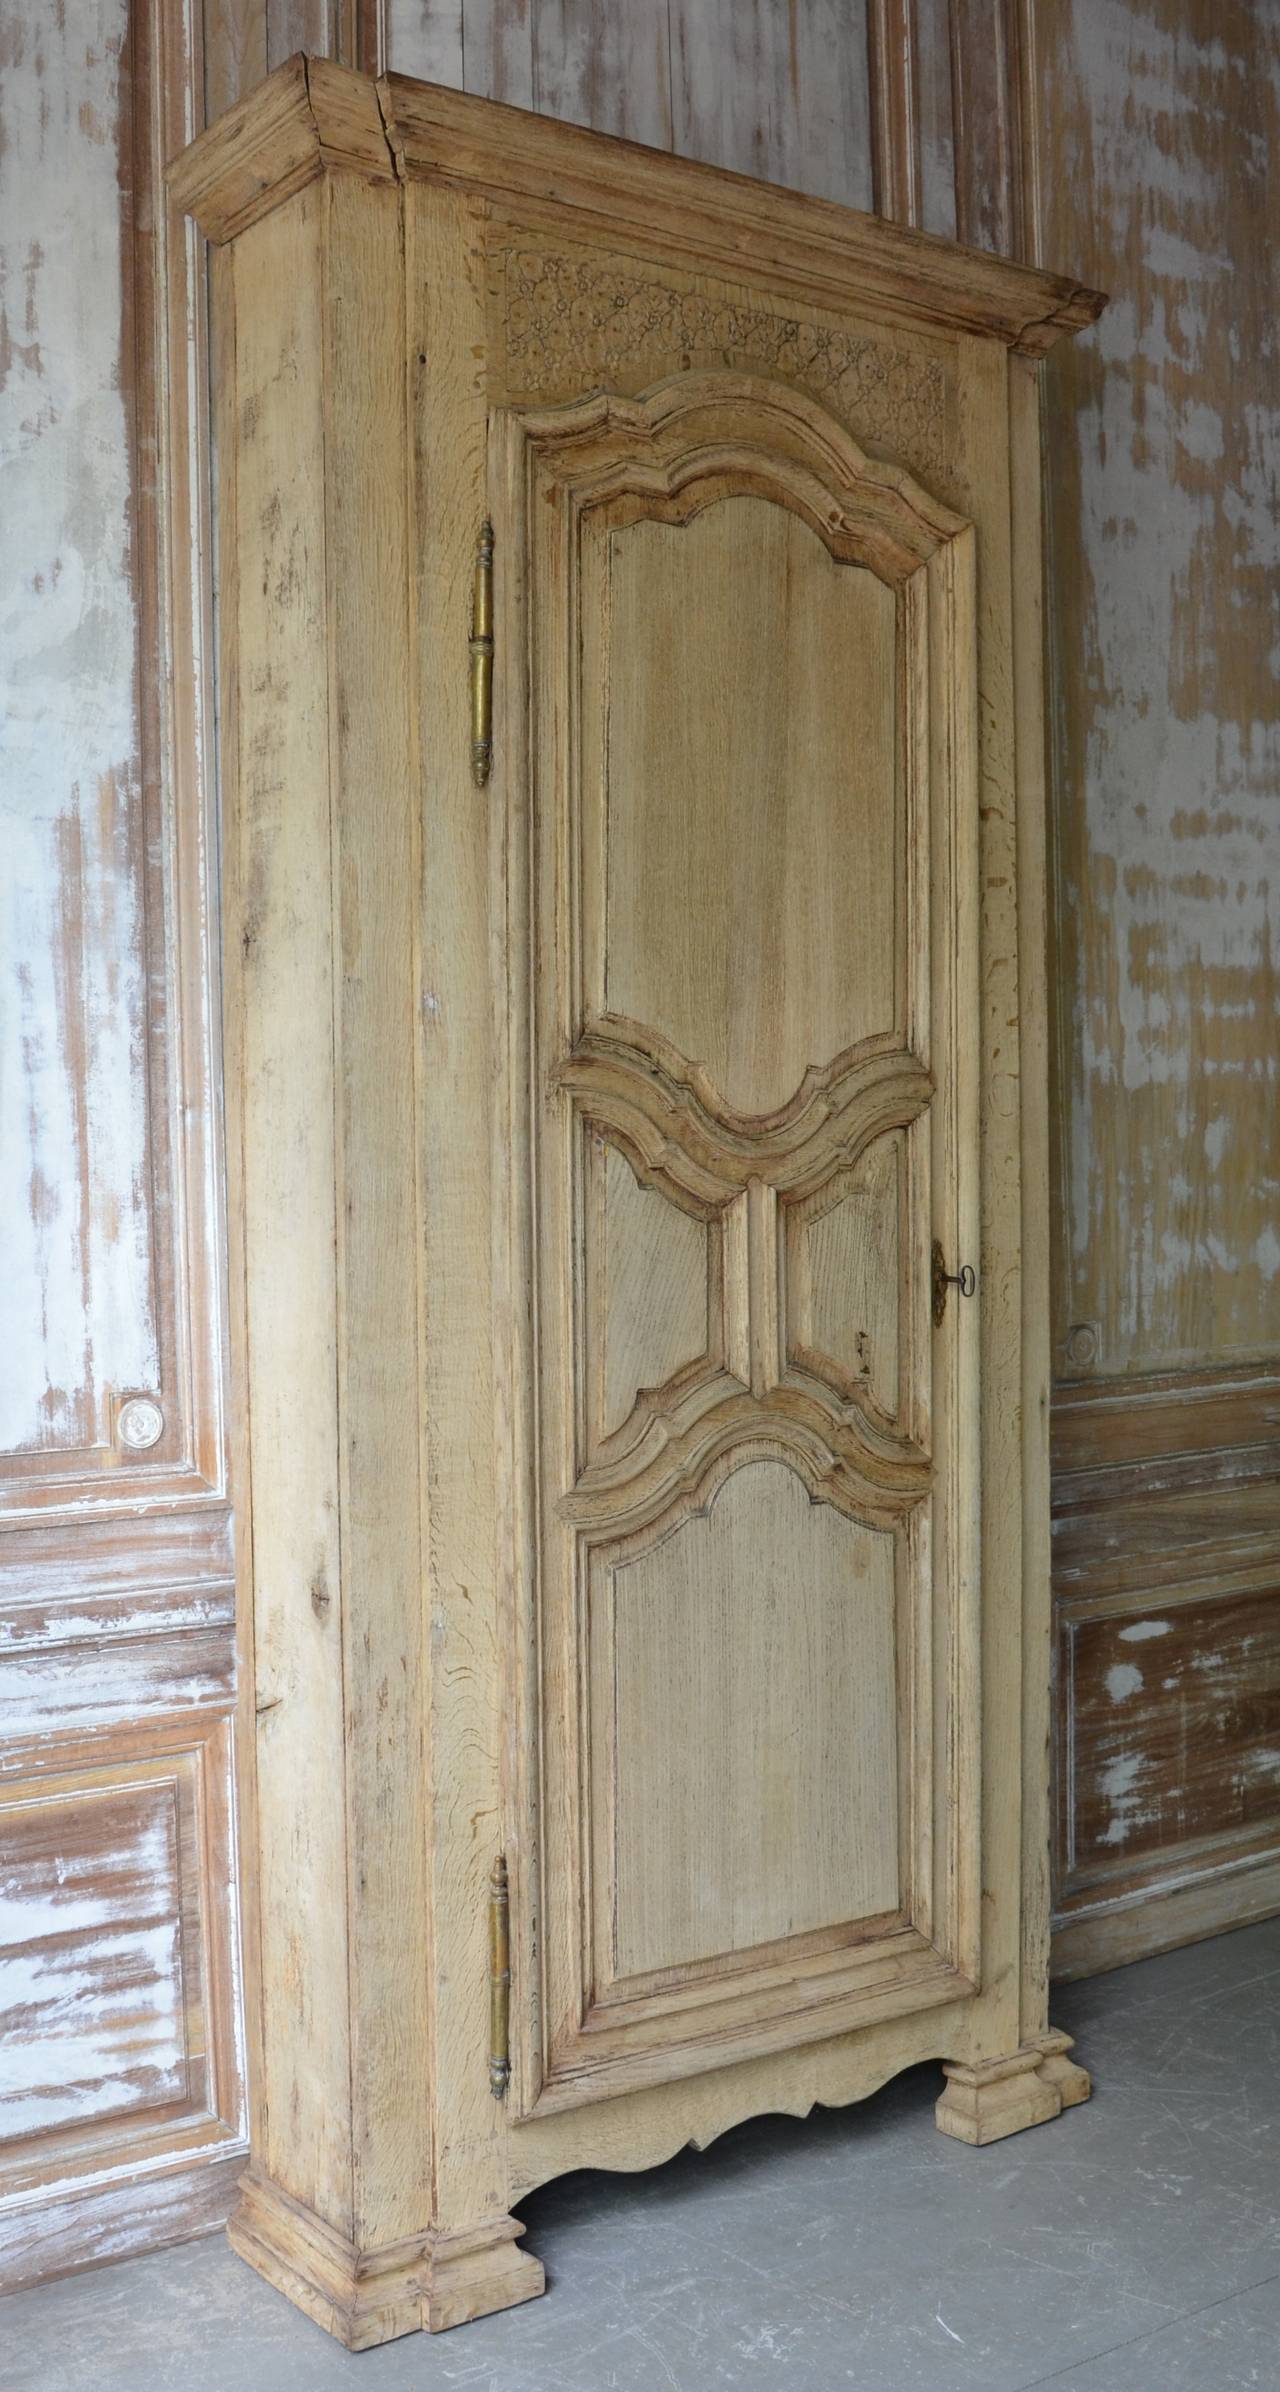 Very handsome, richly carved Armoire de Chasse-(Gun Cabinet), from the Louis XIV period.
It was used to store shotguns.